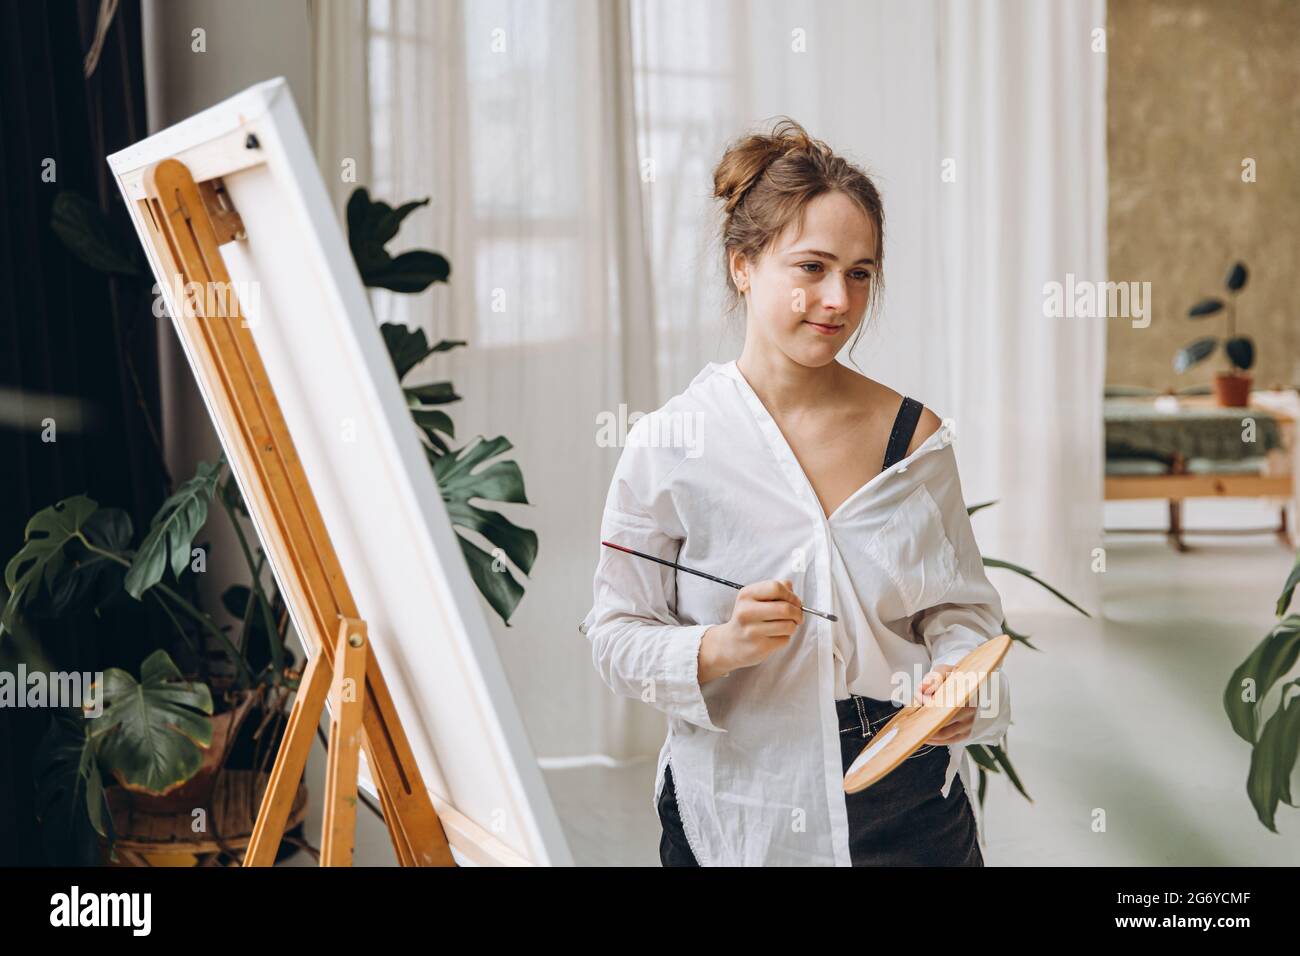 Woman holding paintbrush and color palette in studio Stock Photo